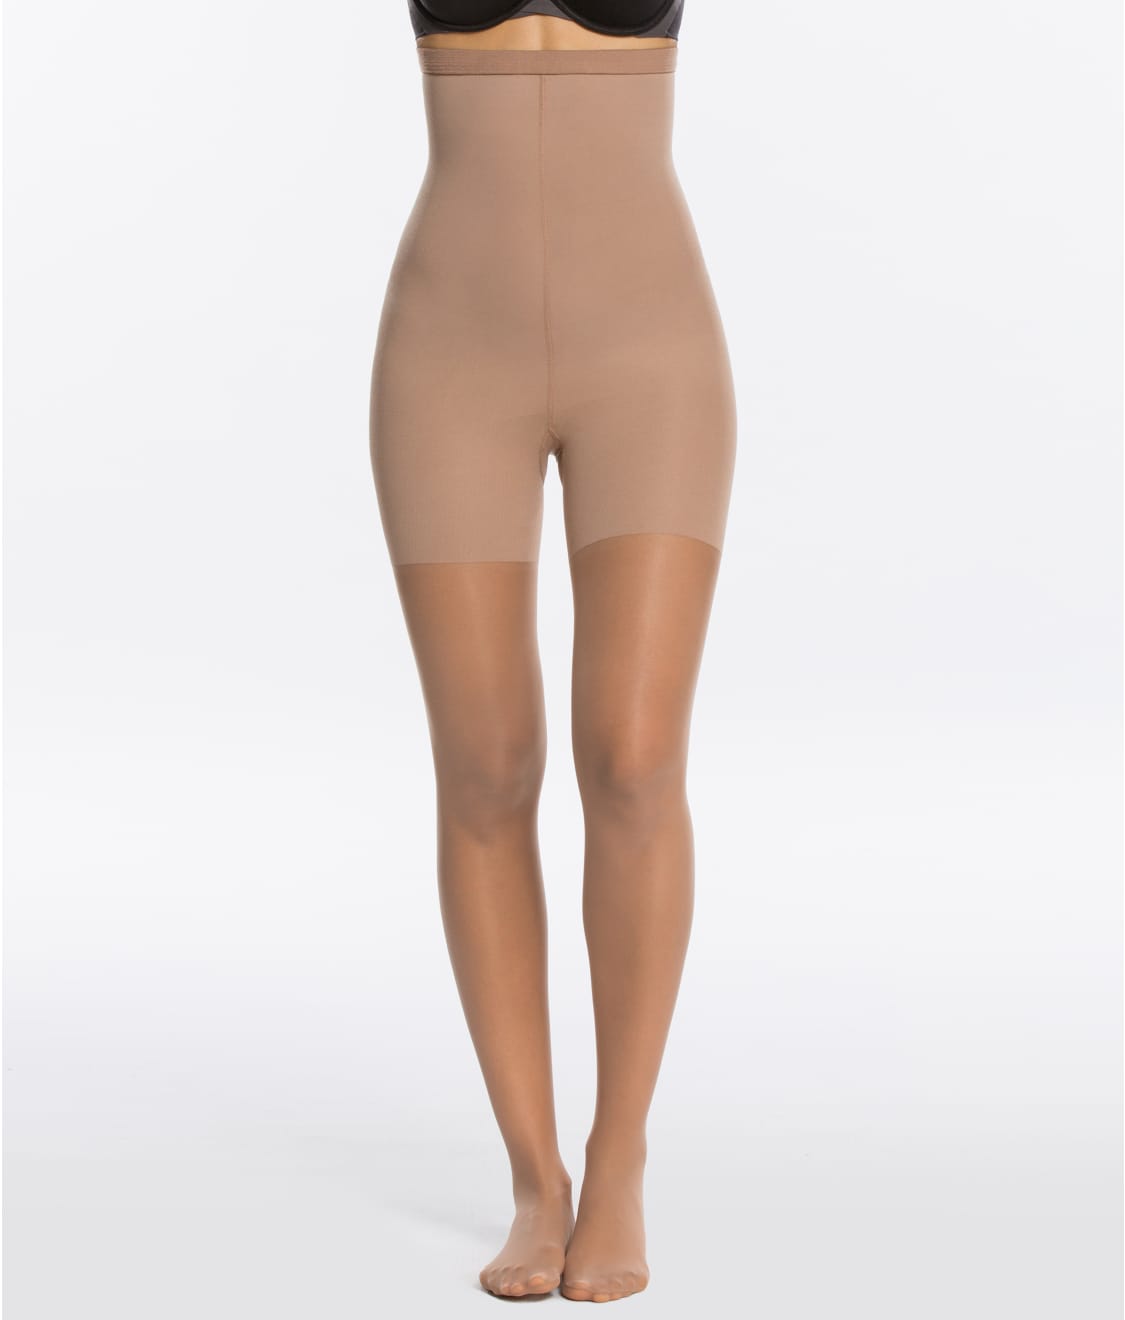 SPANX Luxe Leg High-Waist Sheers Firm Control Pantyhose & Reviews